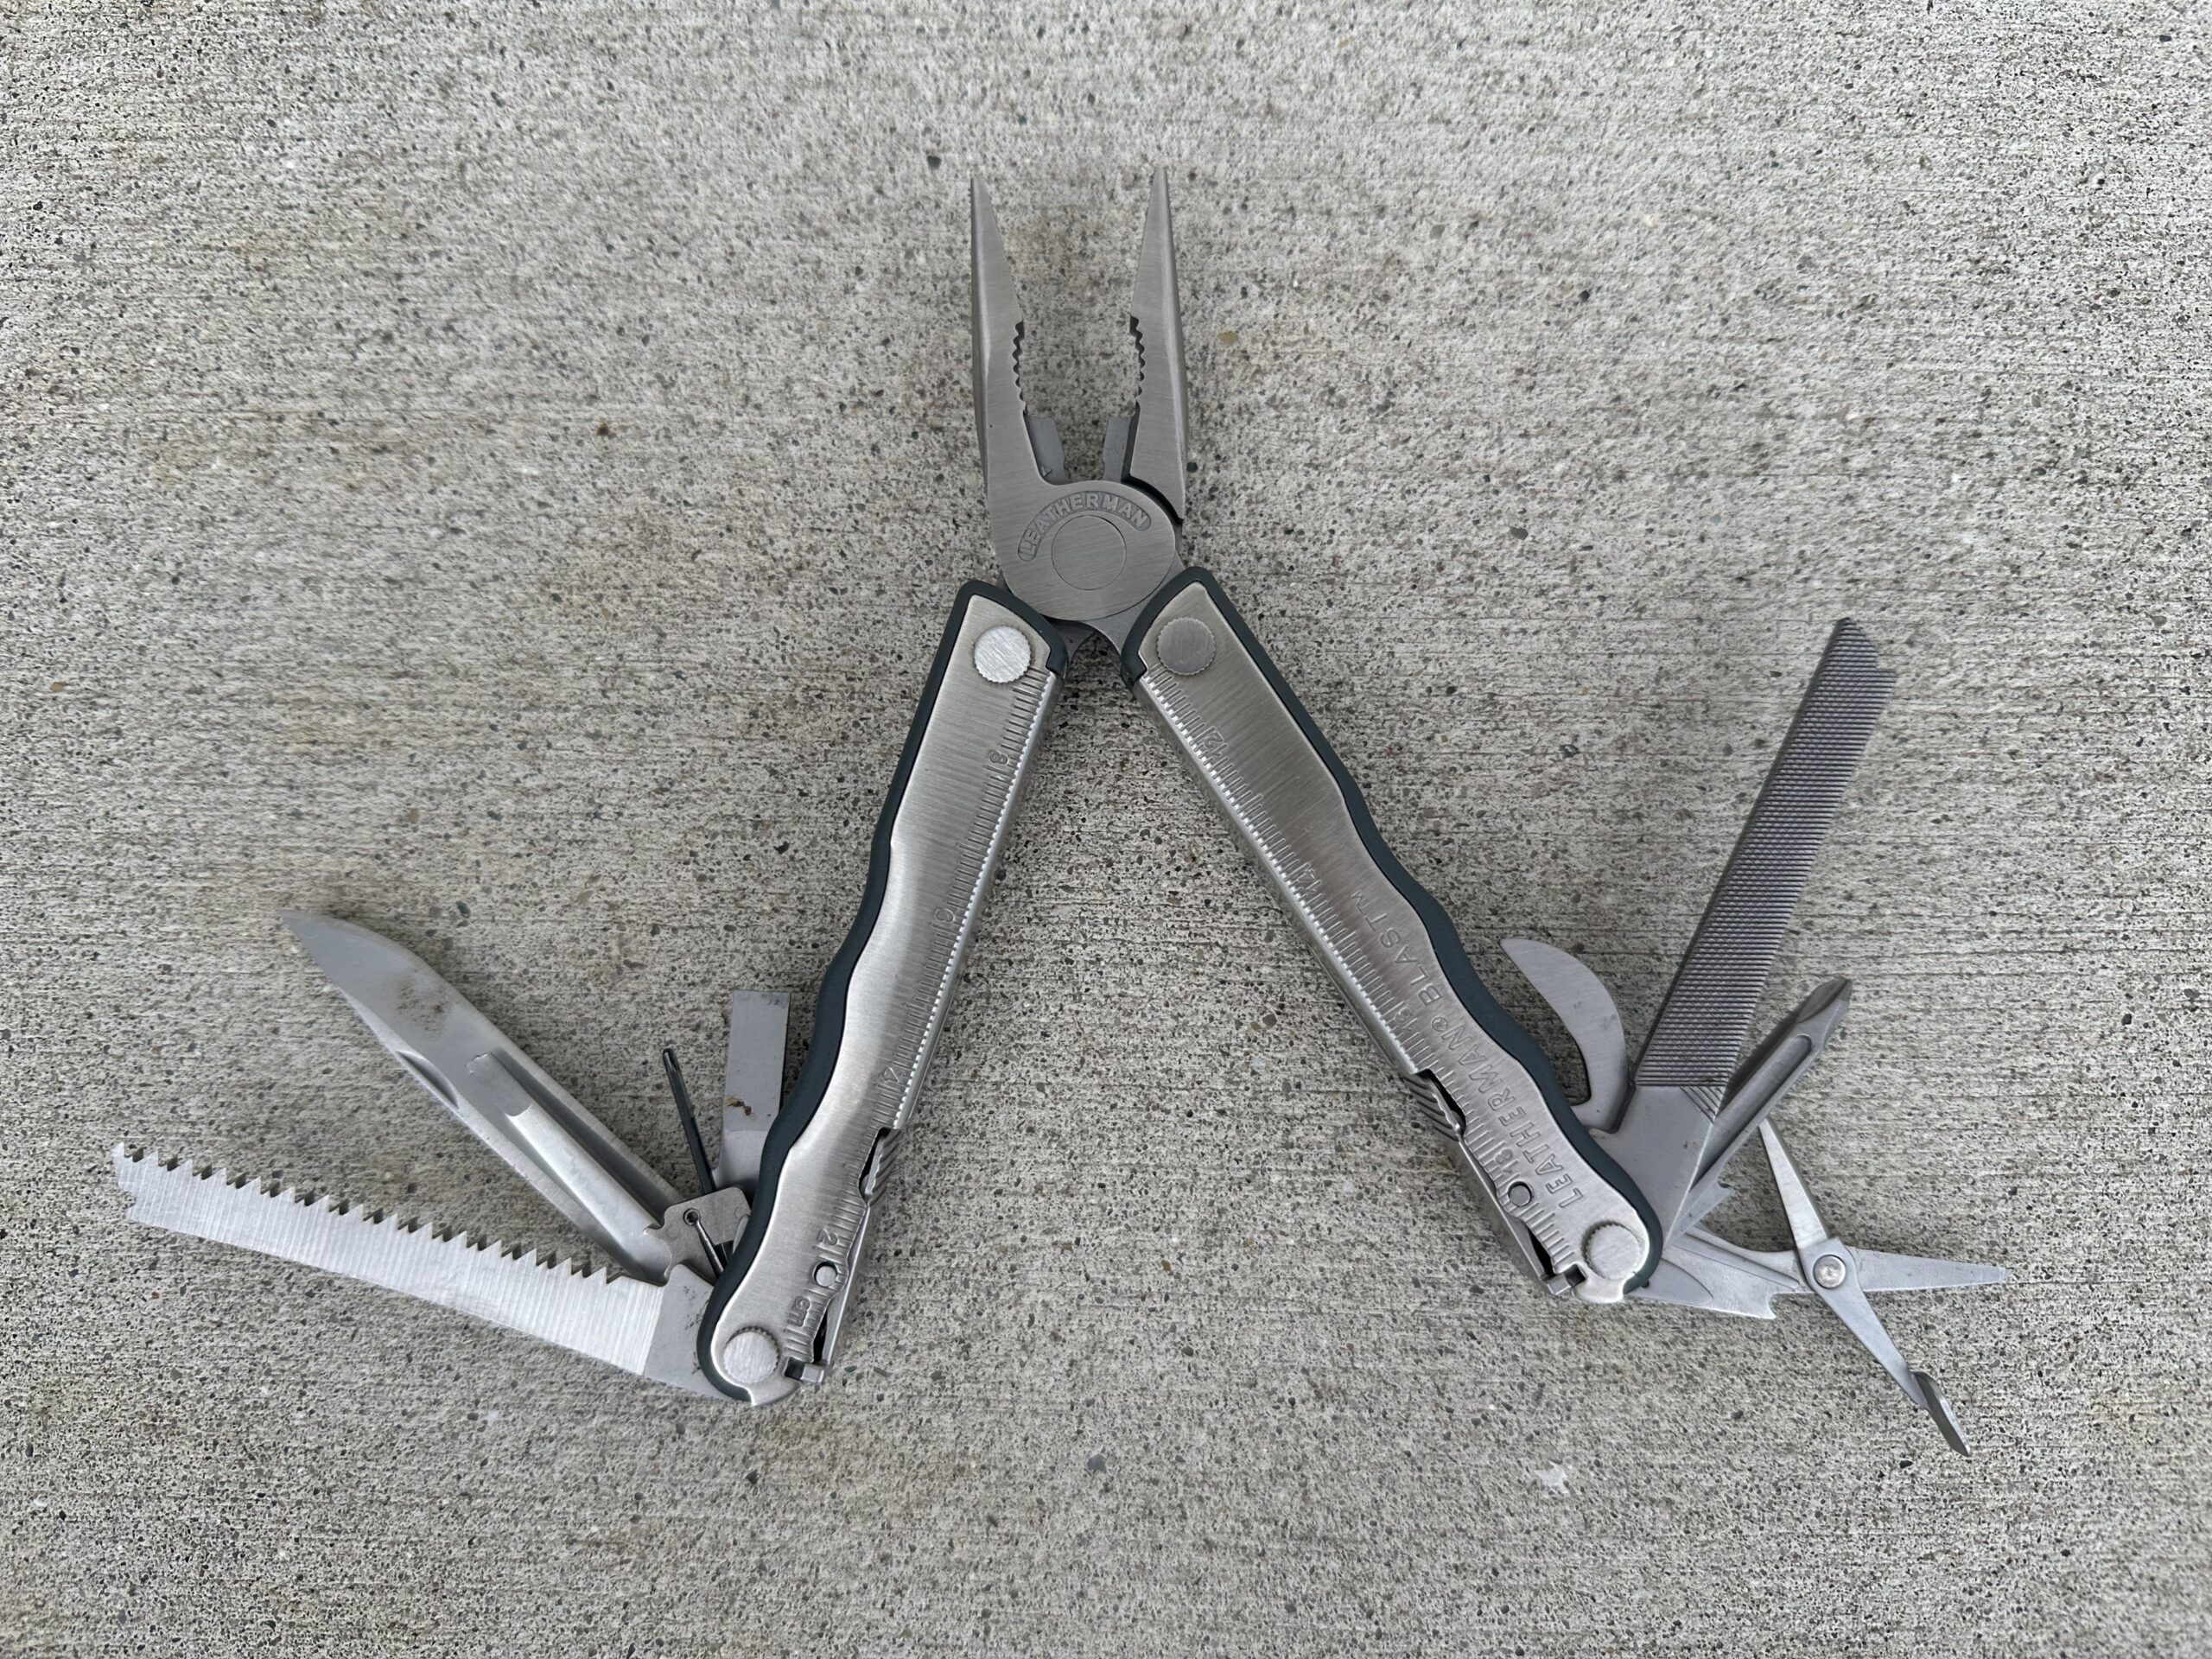 Image of a multitool opened with all the tools out.